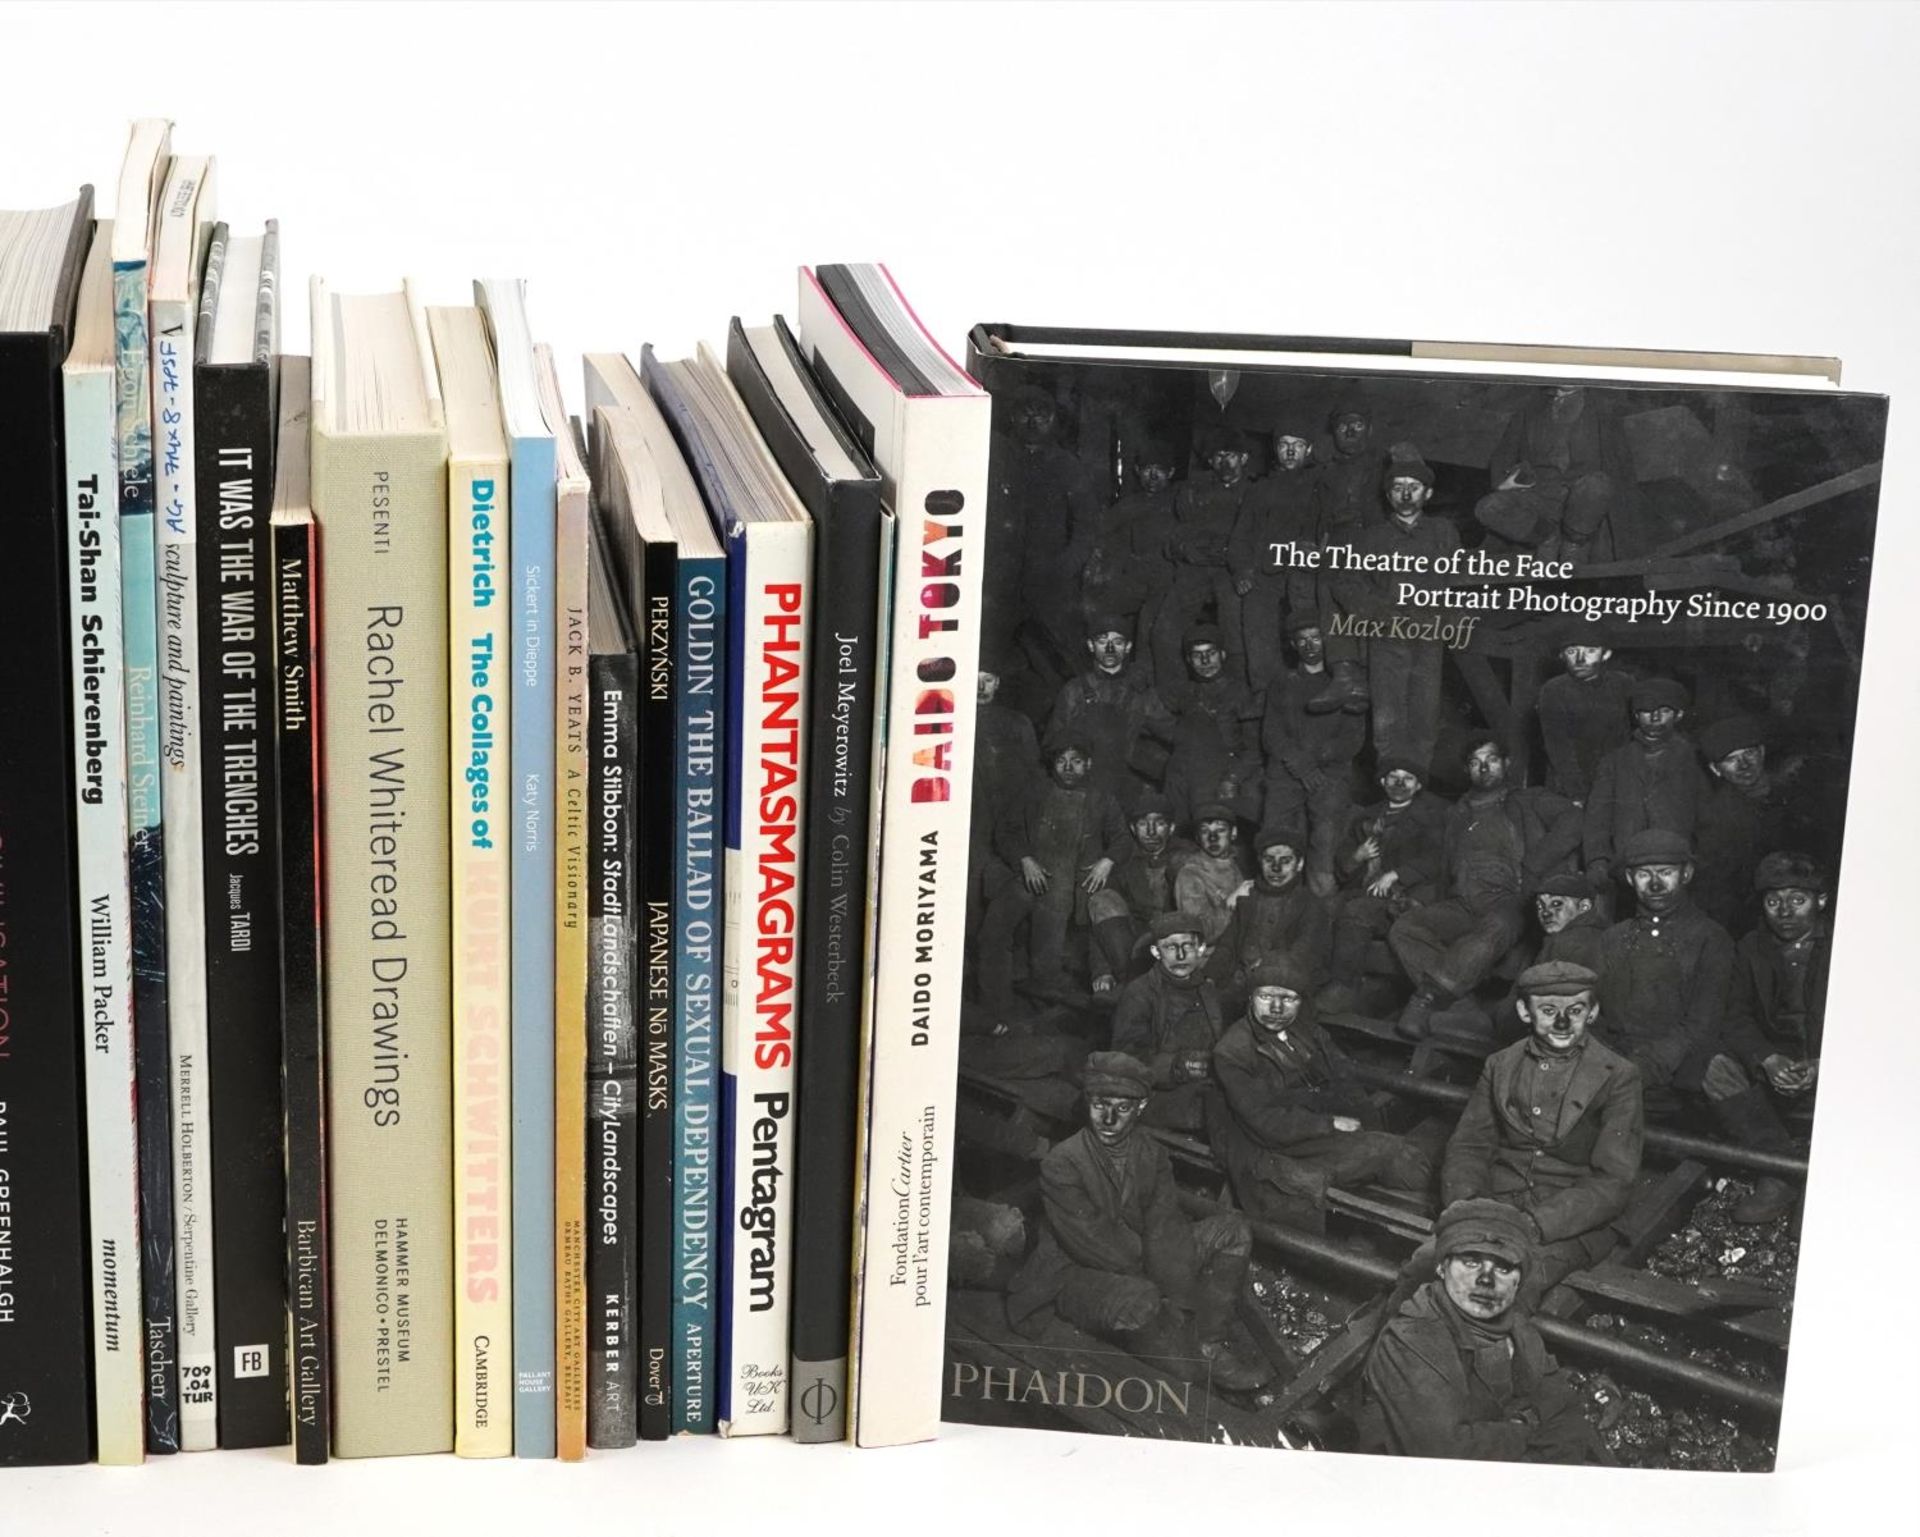 Art and related books including Sean Scully, Natural Beauty and Evelyn Hofer : For further - Image 3 of 3